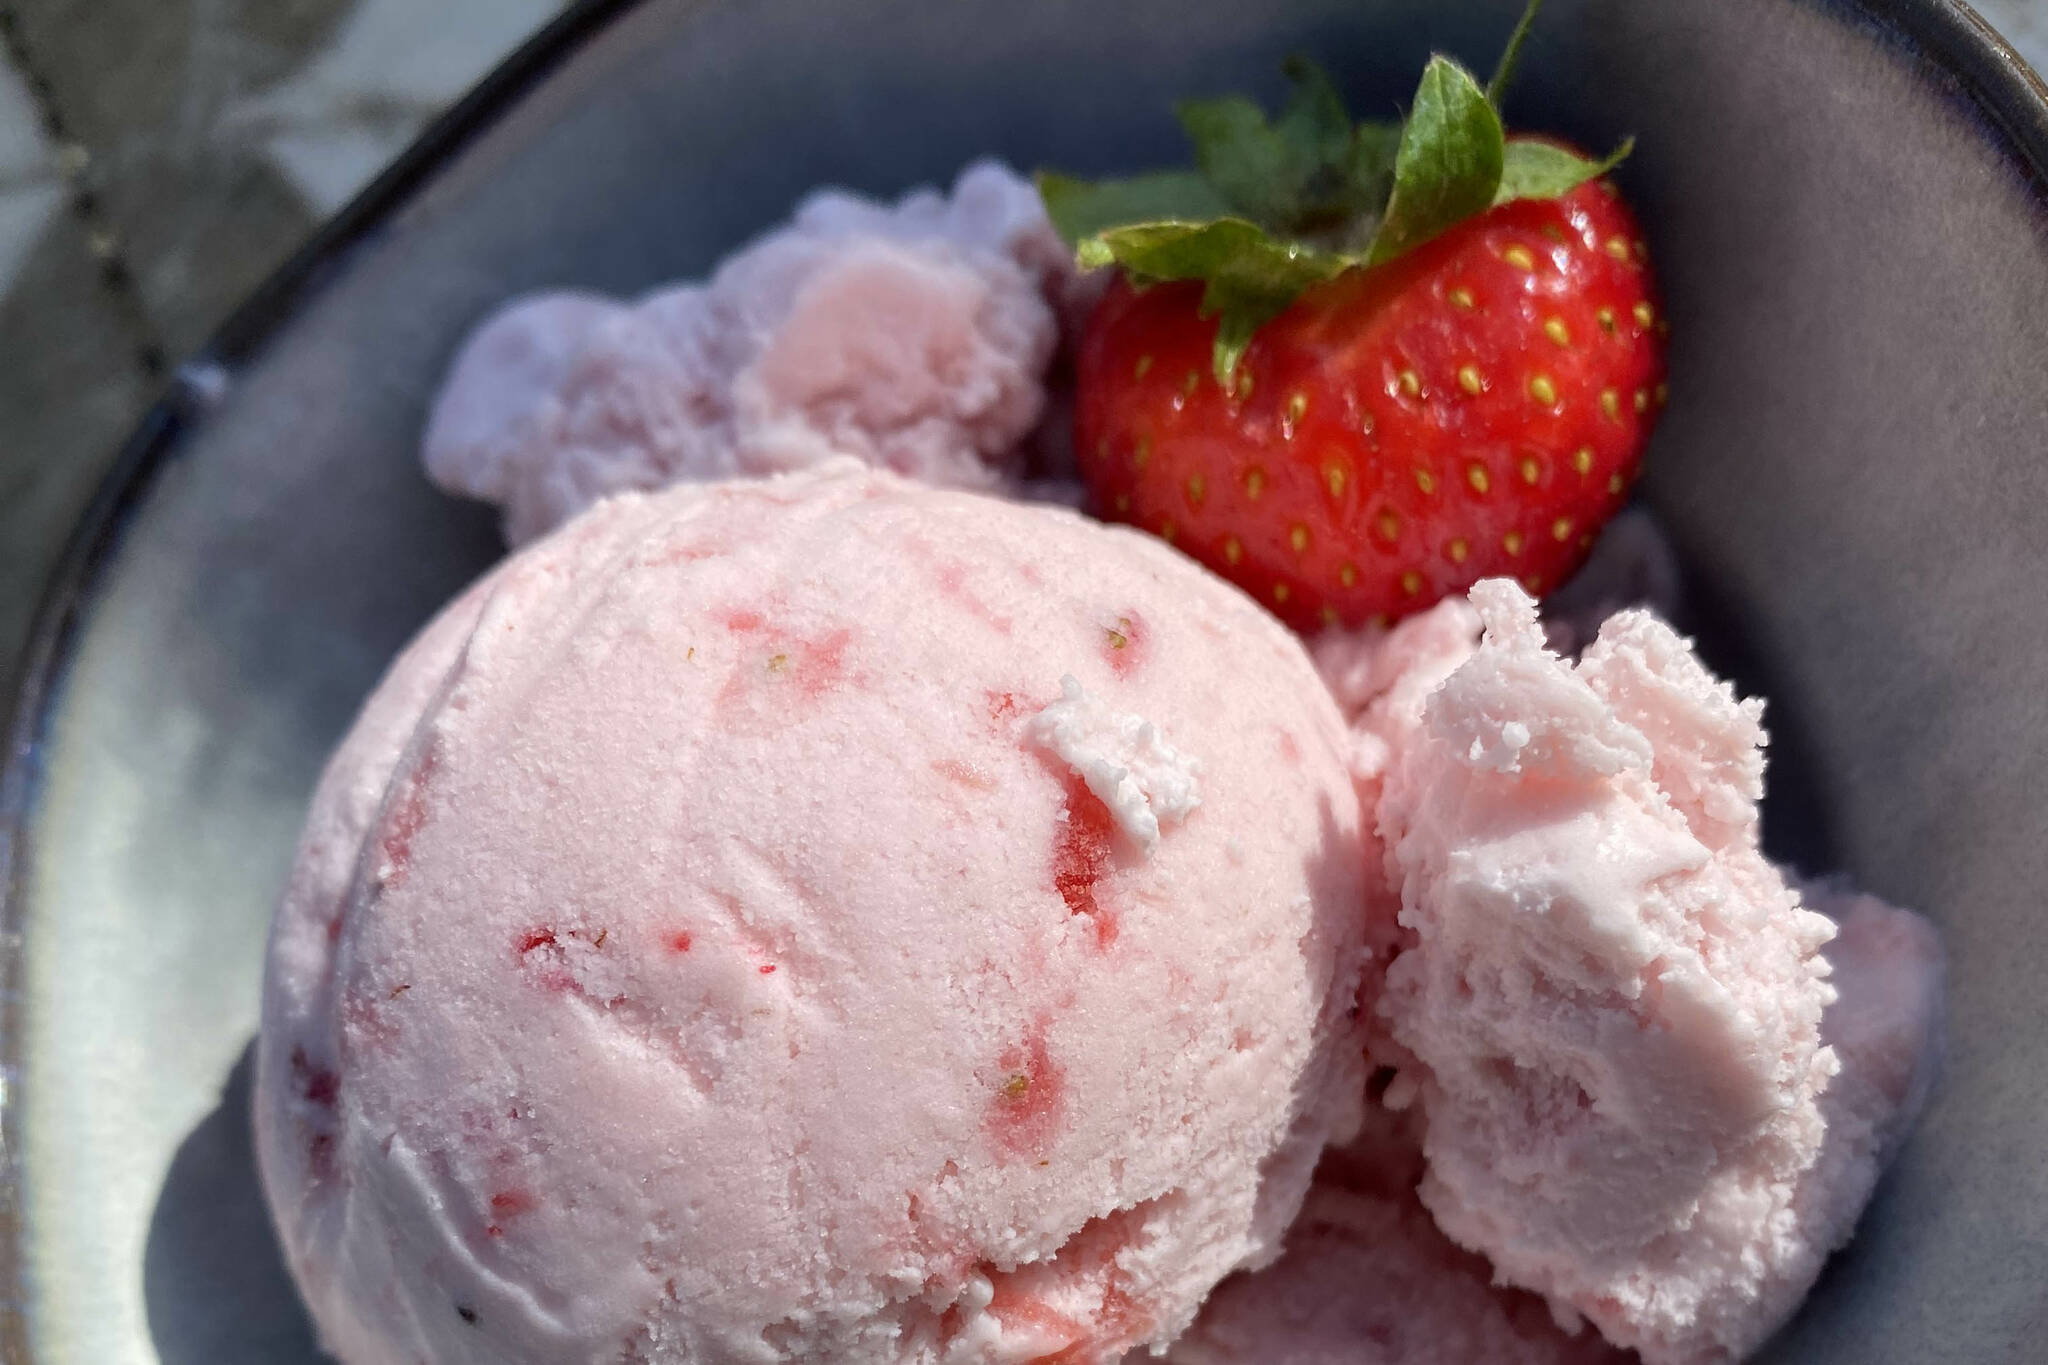 Fresh strawberries will make this ice cream a much more flavorful treat. (Photo by Tressa Dale/Peninsula Clarion)